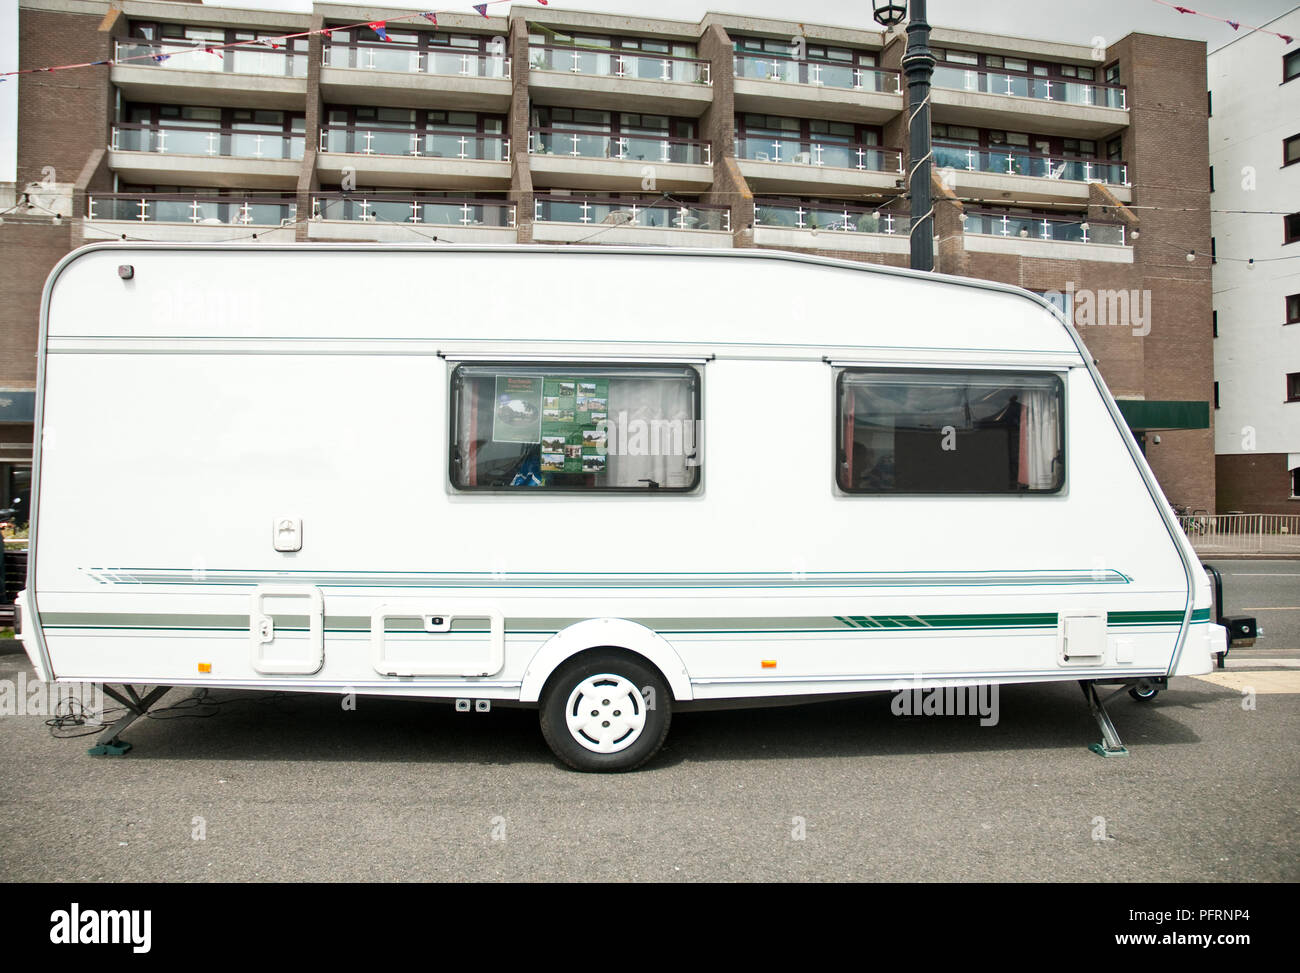 Great Britain, England, West Sussex, Worthing, trailer caravan in a parking area Stock Photo